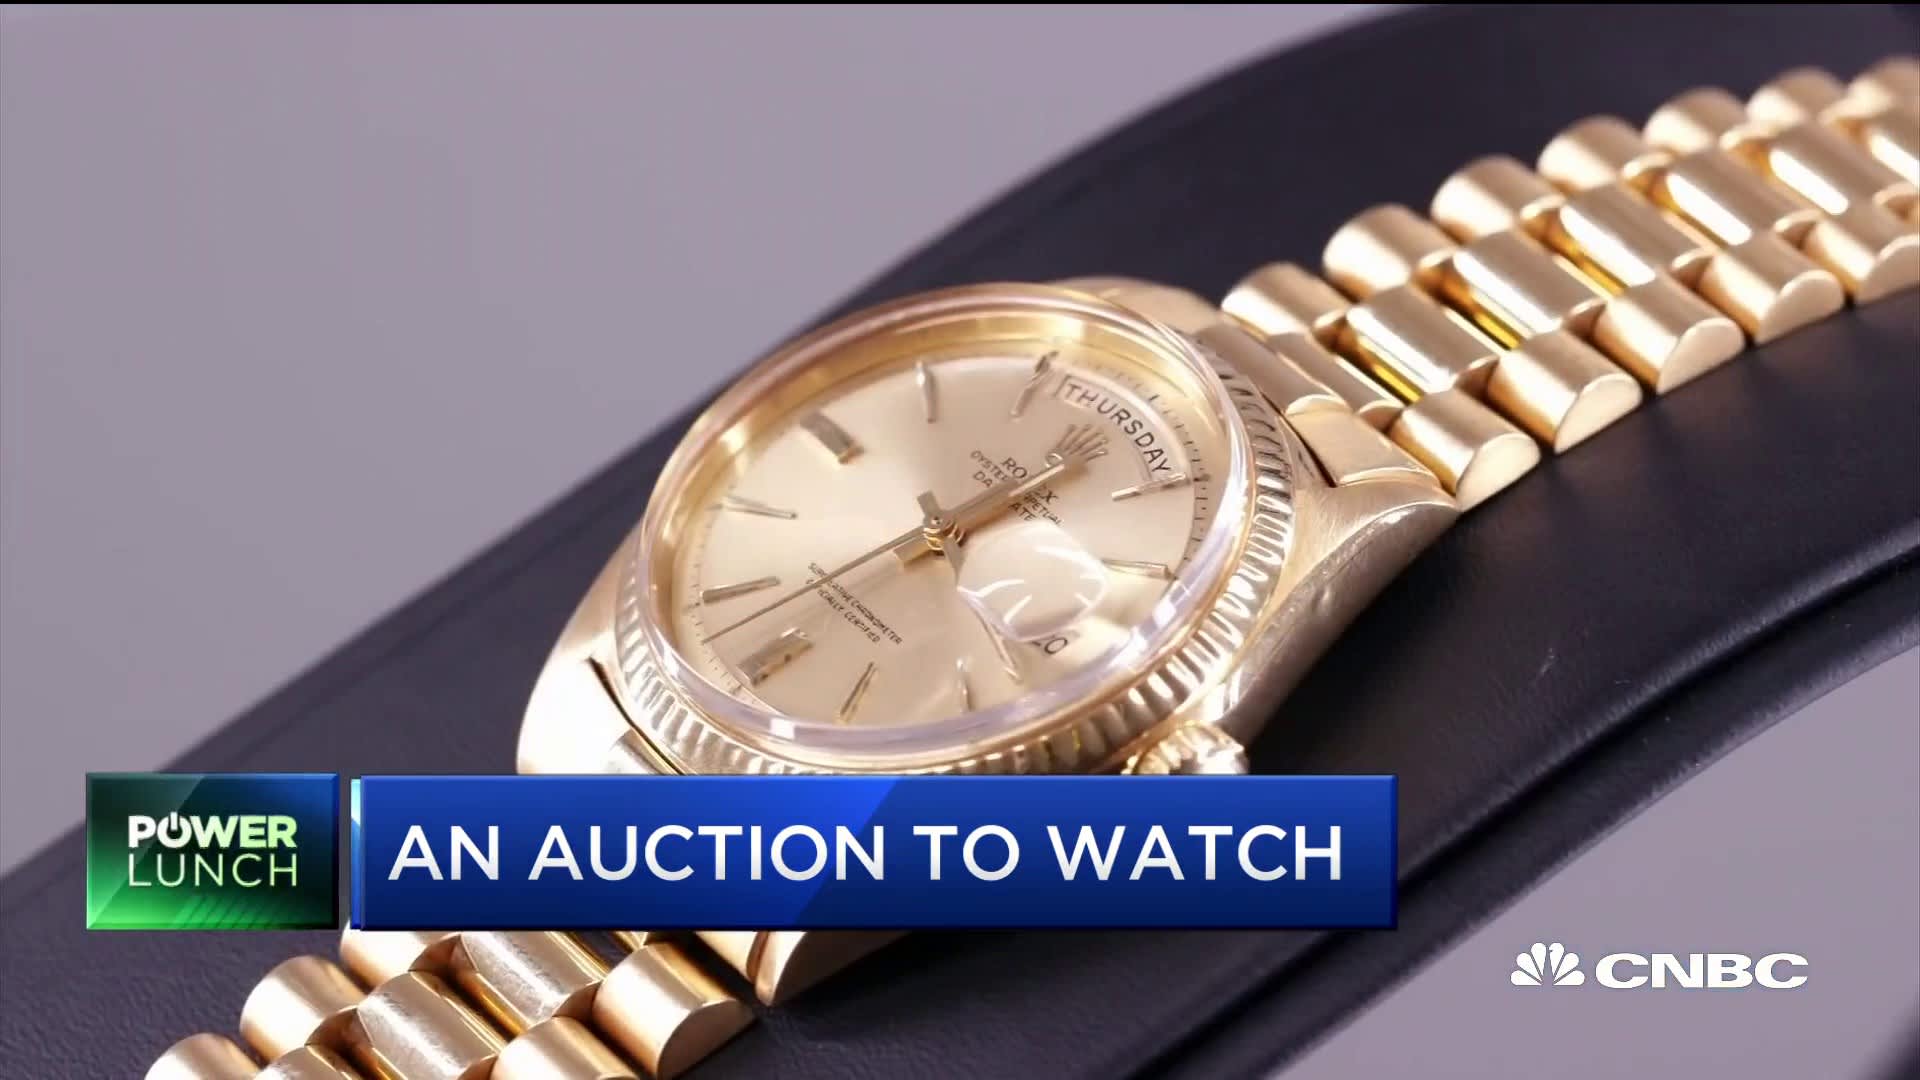 Åbent Brudgom Kom op Rolex bought for $350 is now worth up to $700,000: 'Antiques Roadshow'